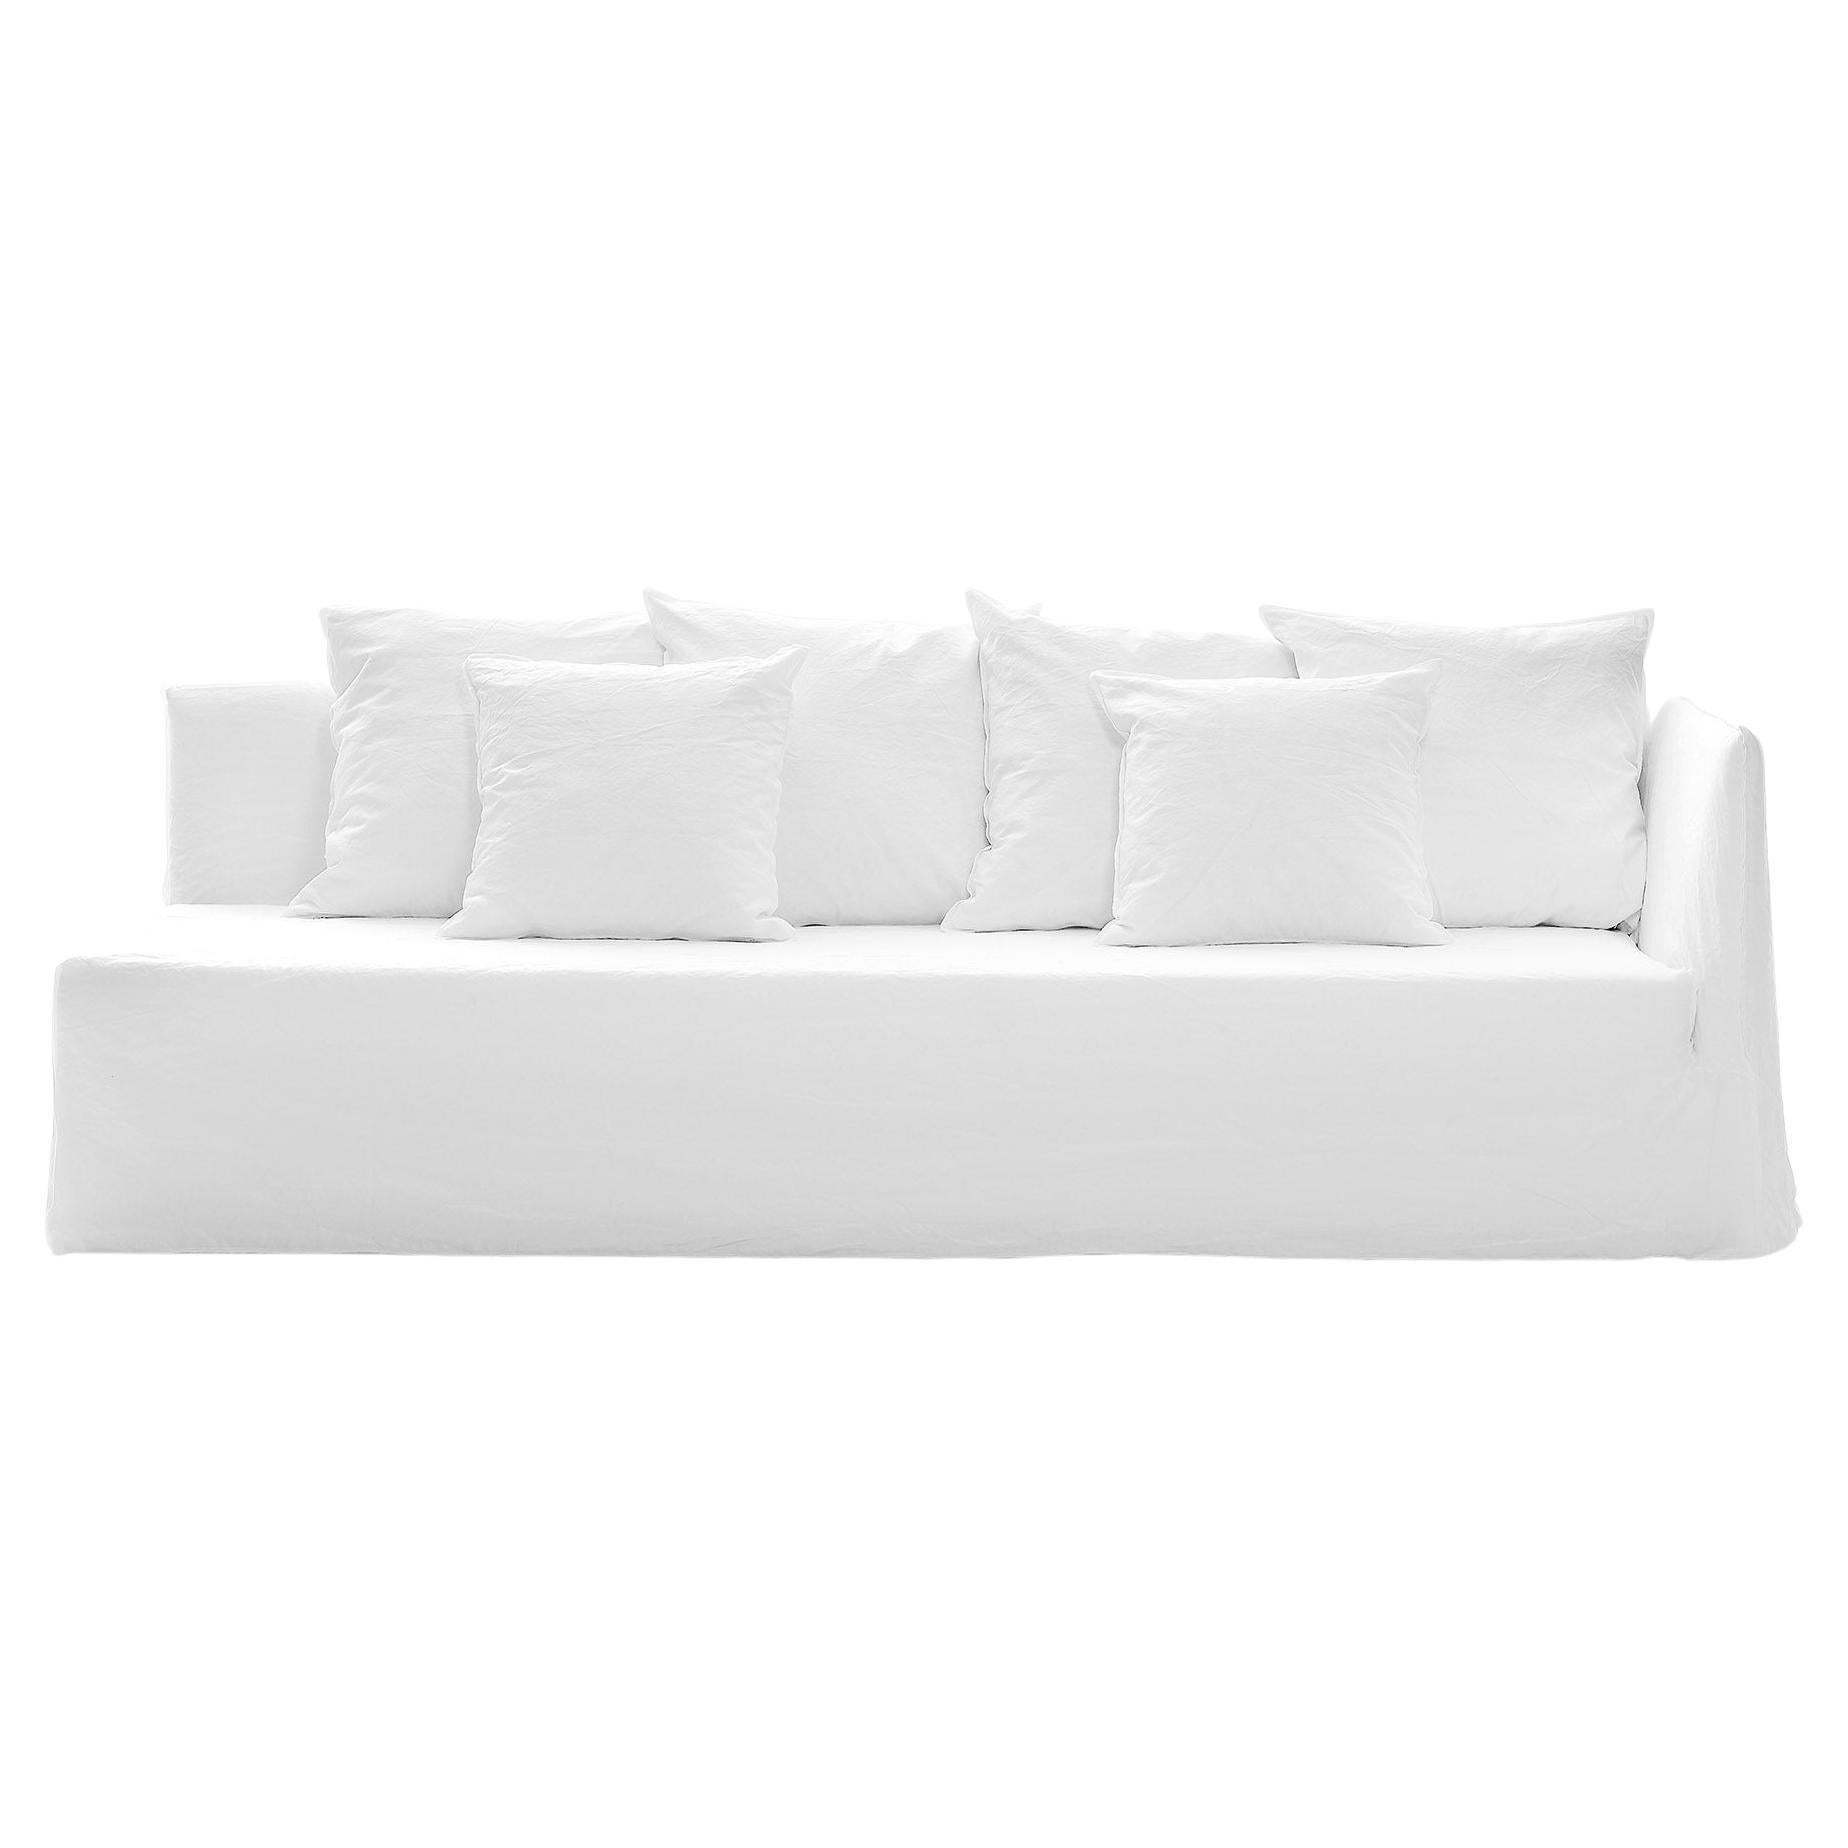 Gervasoni Ghost 22 R Modular Sofa in White Linen Upholstery by Paola Navone For Sale